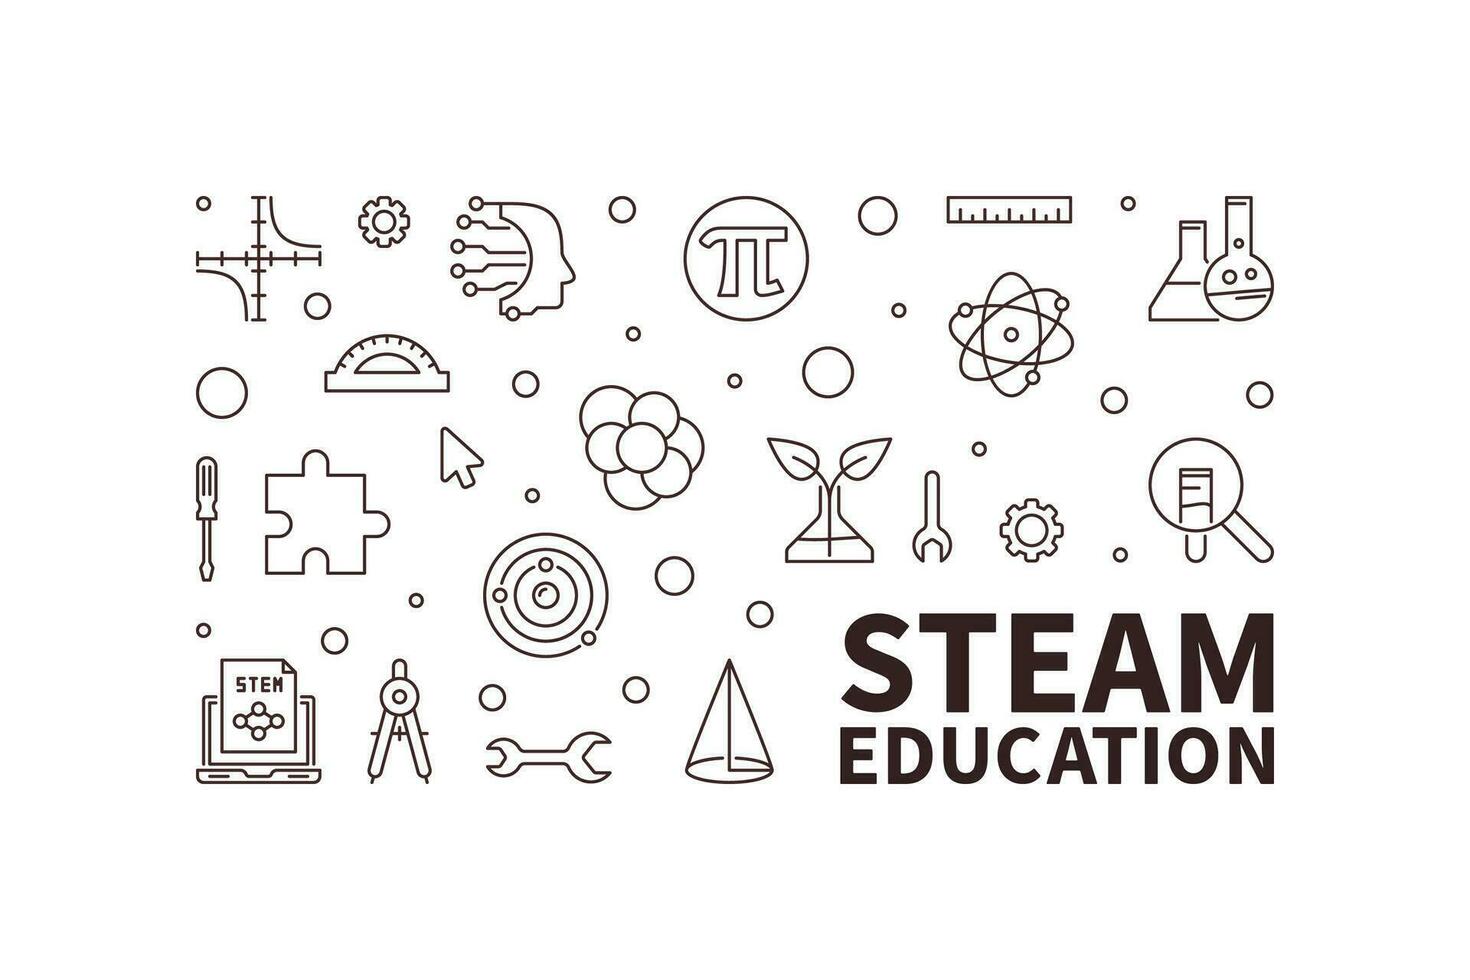 STEAM Education horizontal vector line illustration. Science, Technology, Engineering, the Arts and Math banner